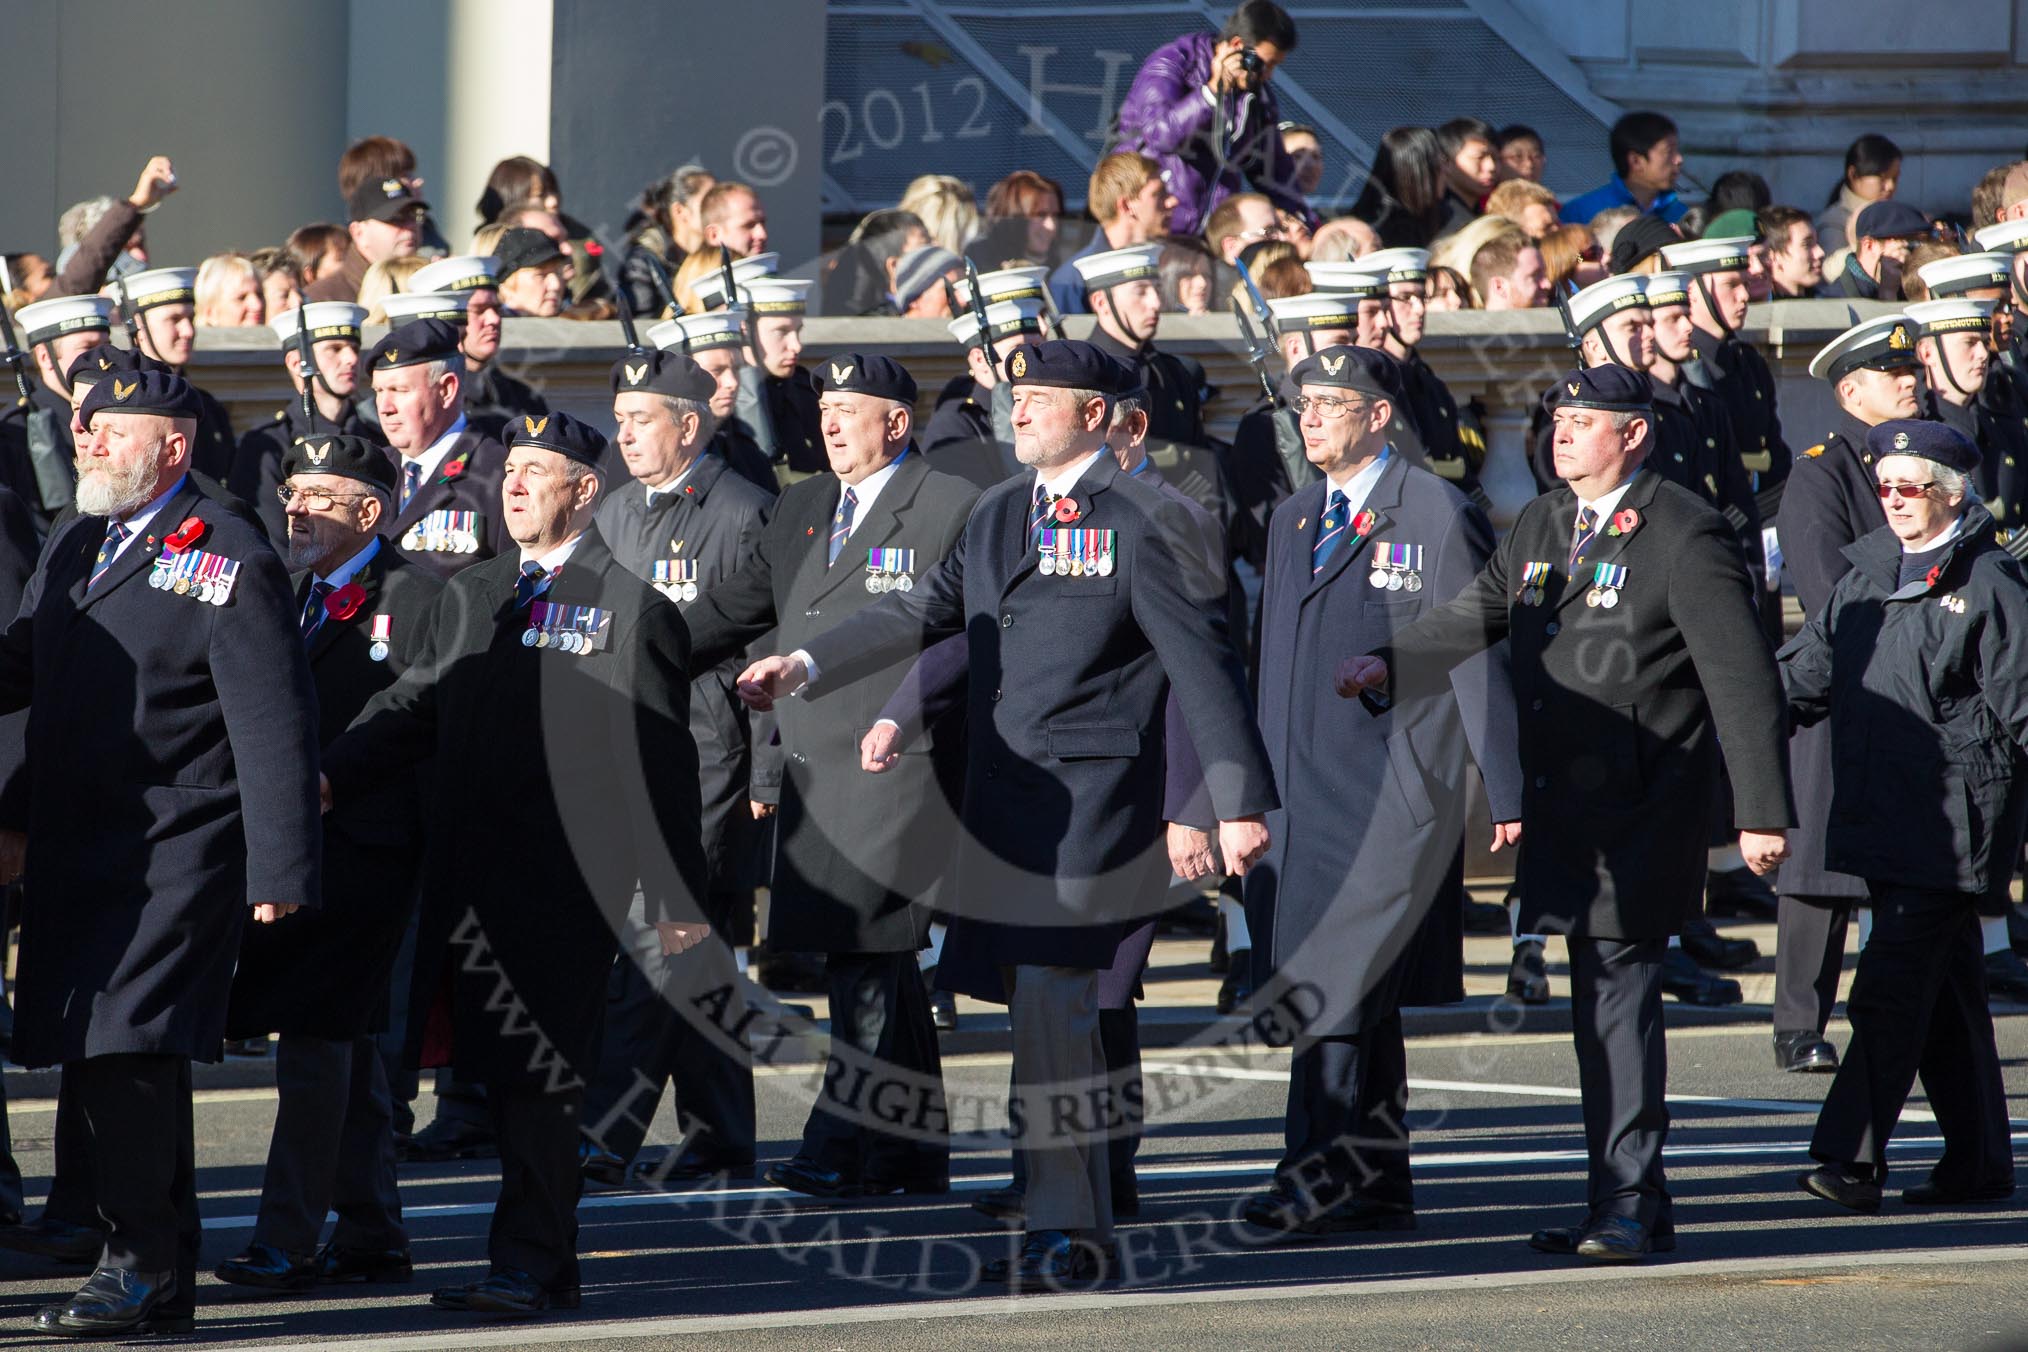 Remembrance Sunday 2012 Cenotaph March Past: Group E6 - Aircrewmans Association..
Whitehall, Cenotaph,
London SW1,

United Kingdom,
on 11 November 2012 at 11:39, image #87